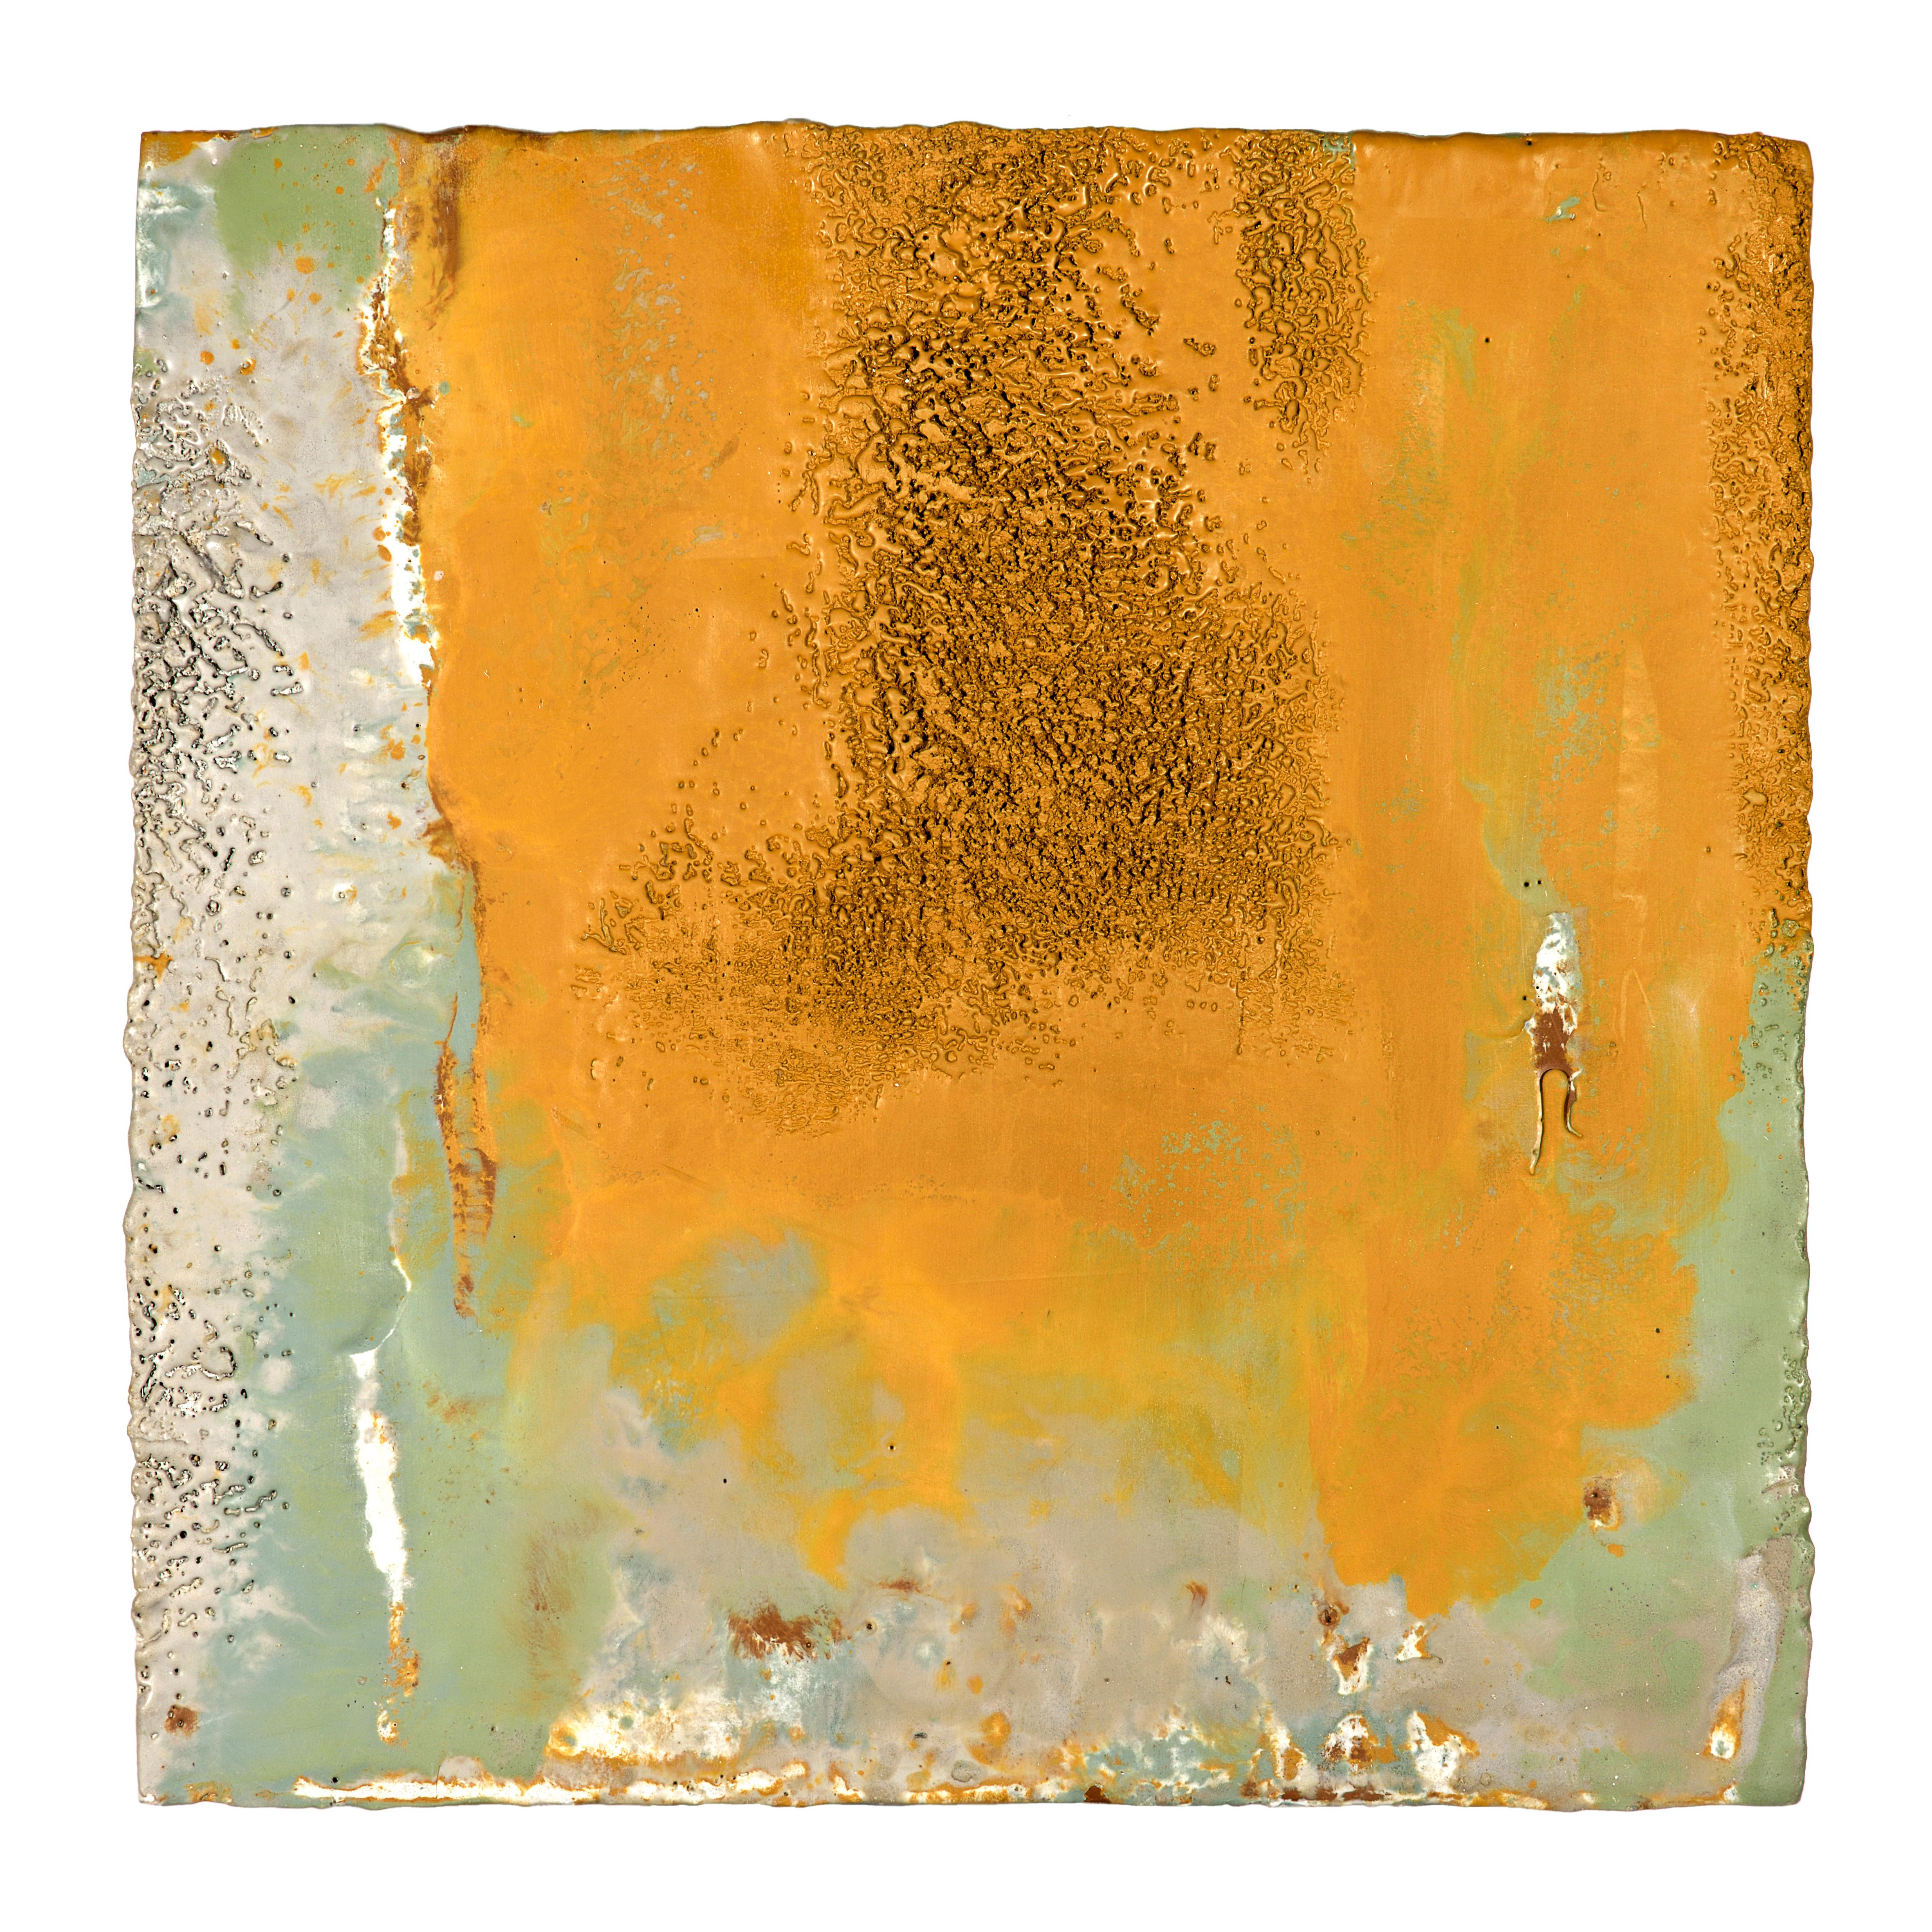 Modern Richard Hirsch Encaustic Painting of Nothing #28, 2012 For Sale